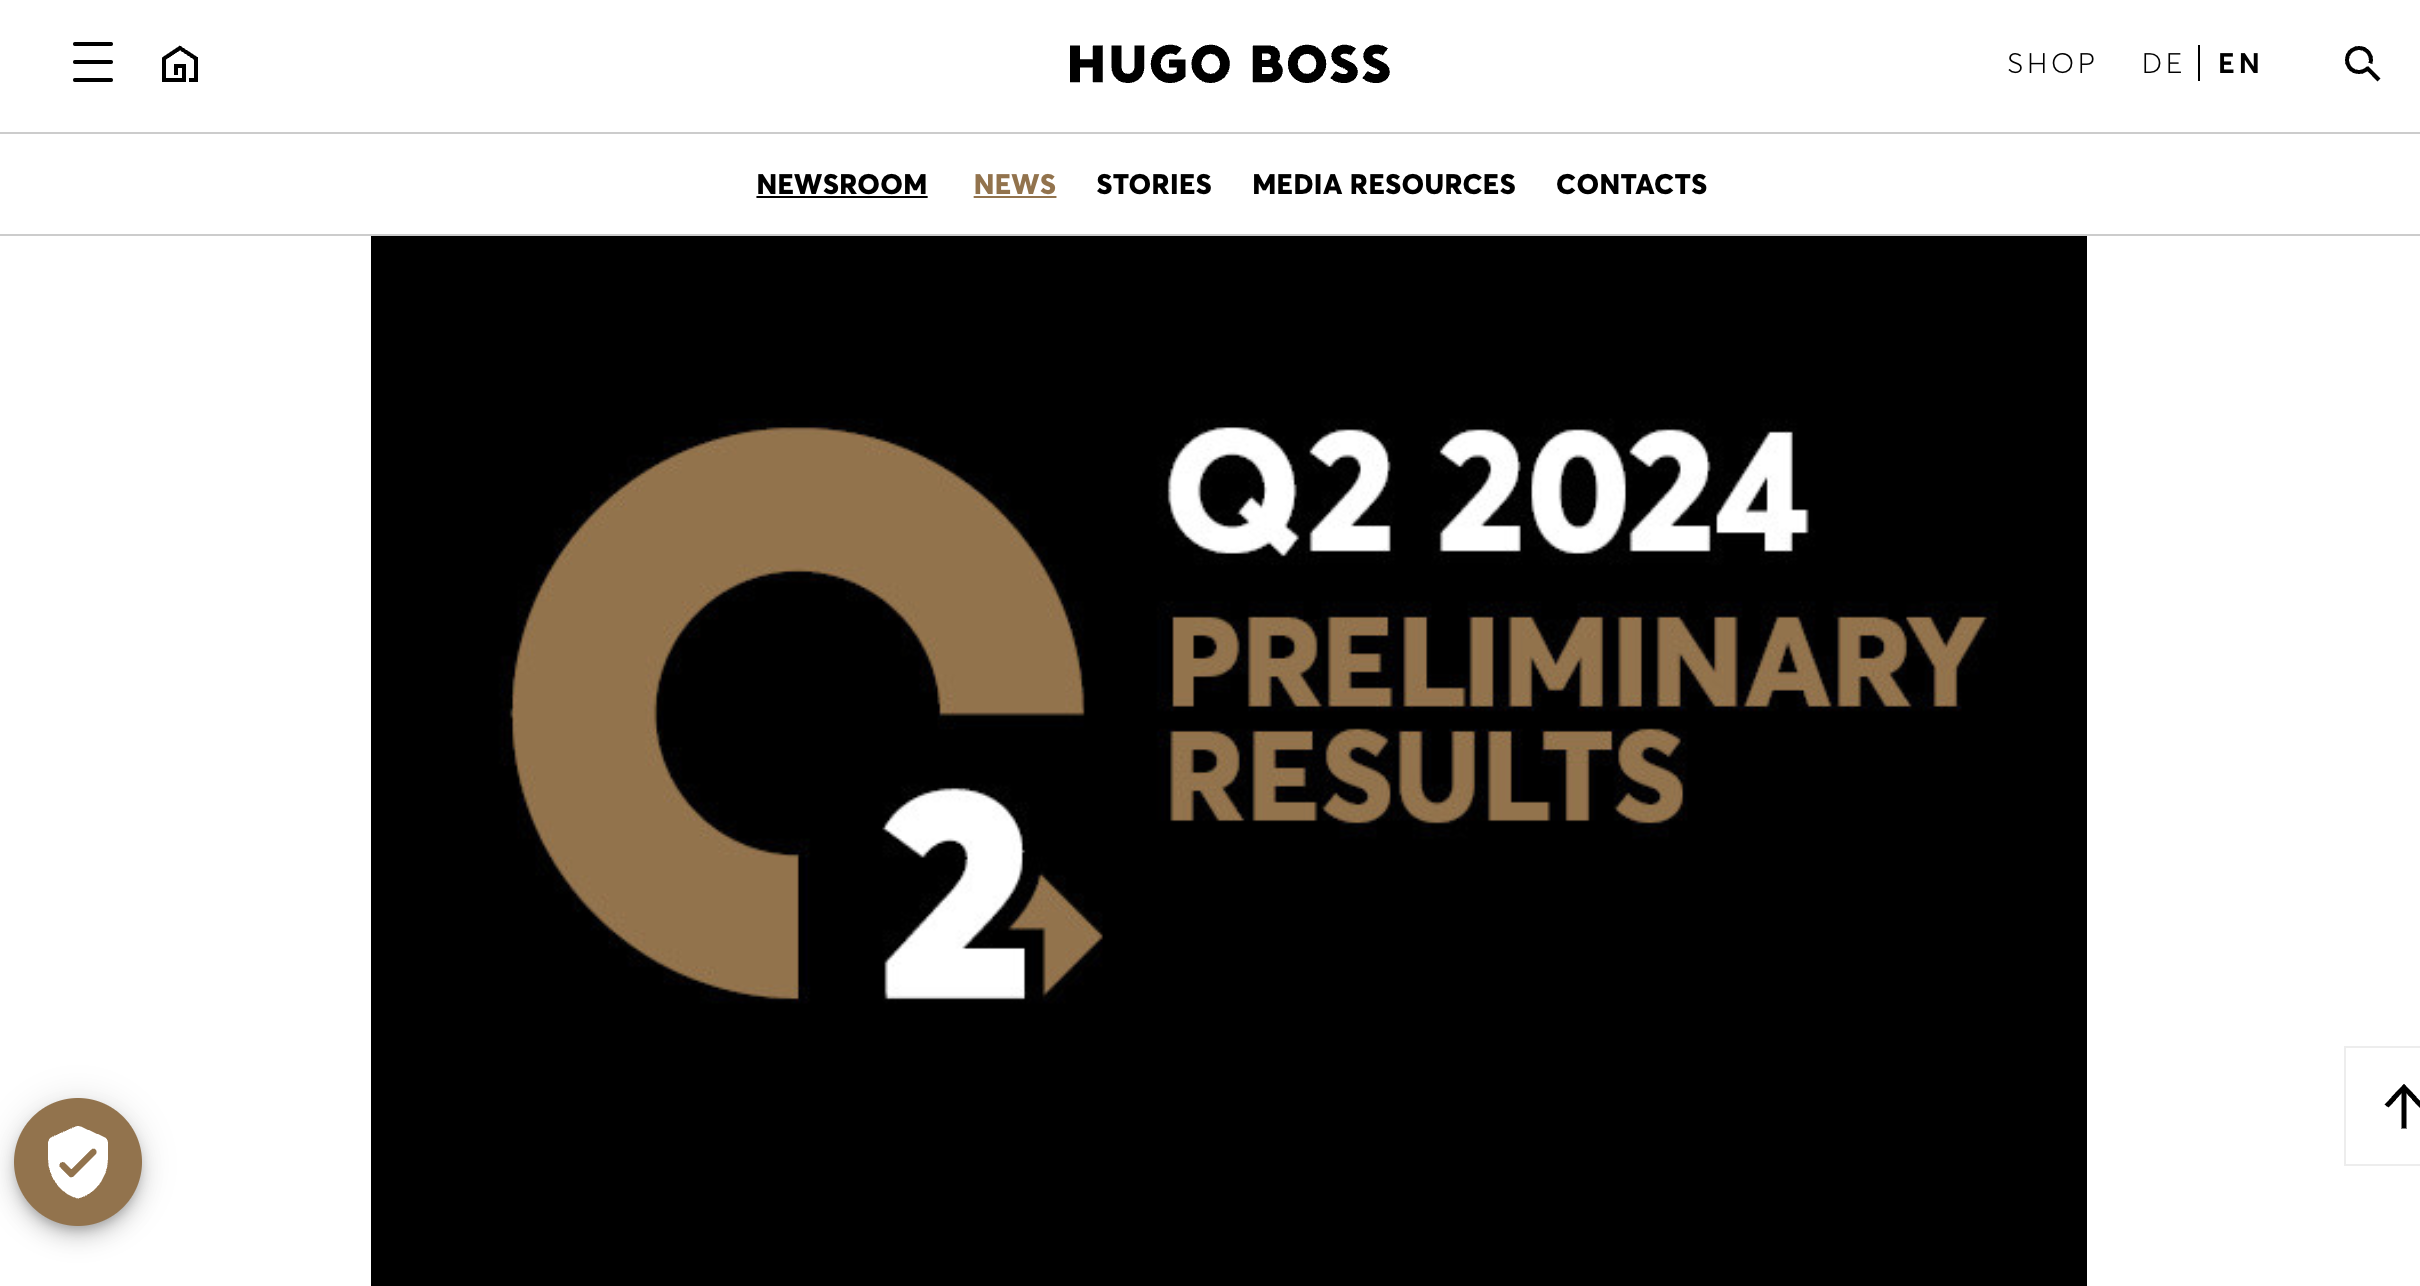 HUGO BOSS Announces Q2 Results: Cash Flow Further Improved, Revenue in Asia-Pacific Down 4% Year-on-Year